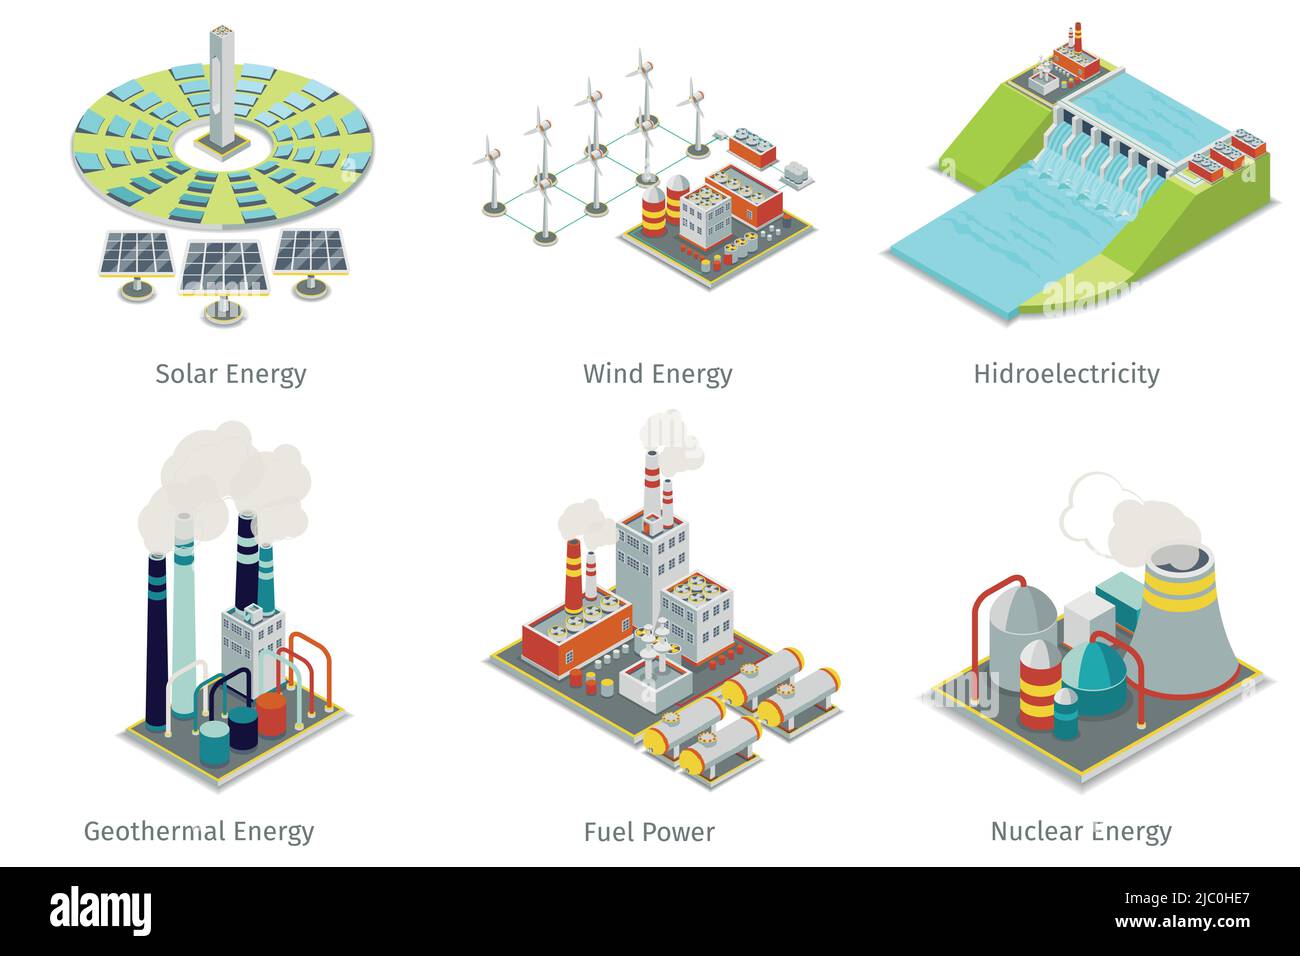 Power plant icons. Electricity generation plants and sources. Electricity energy, hydroelectricity energy, geothermal energy, solar and wind energy. V Stock Vector